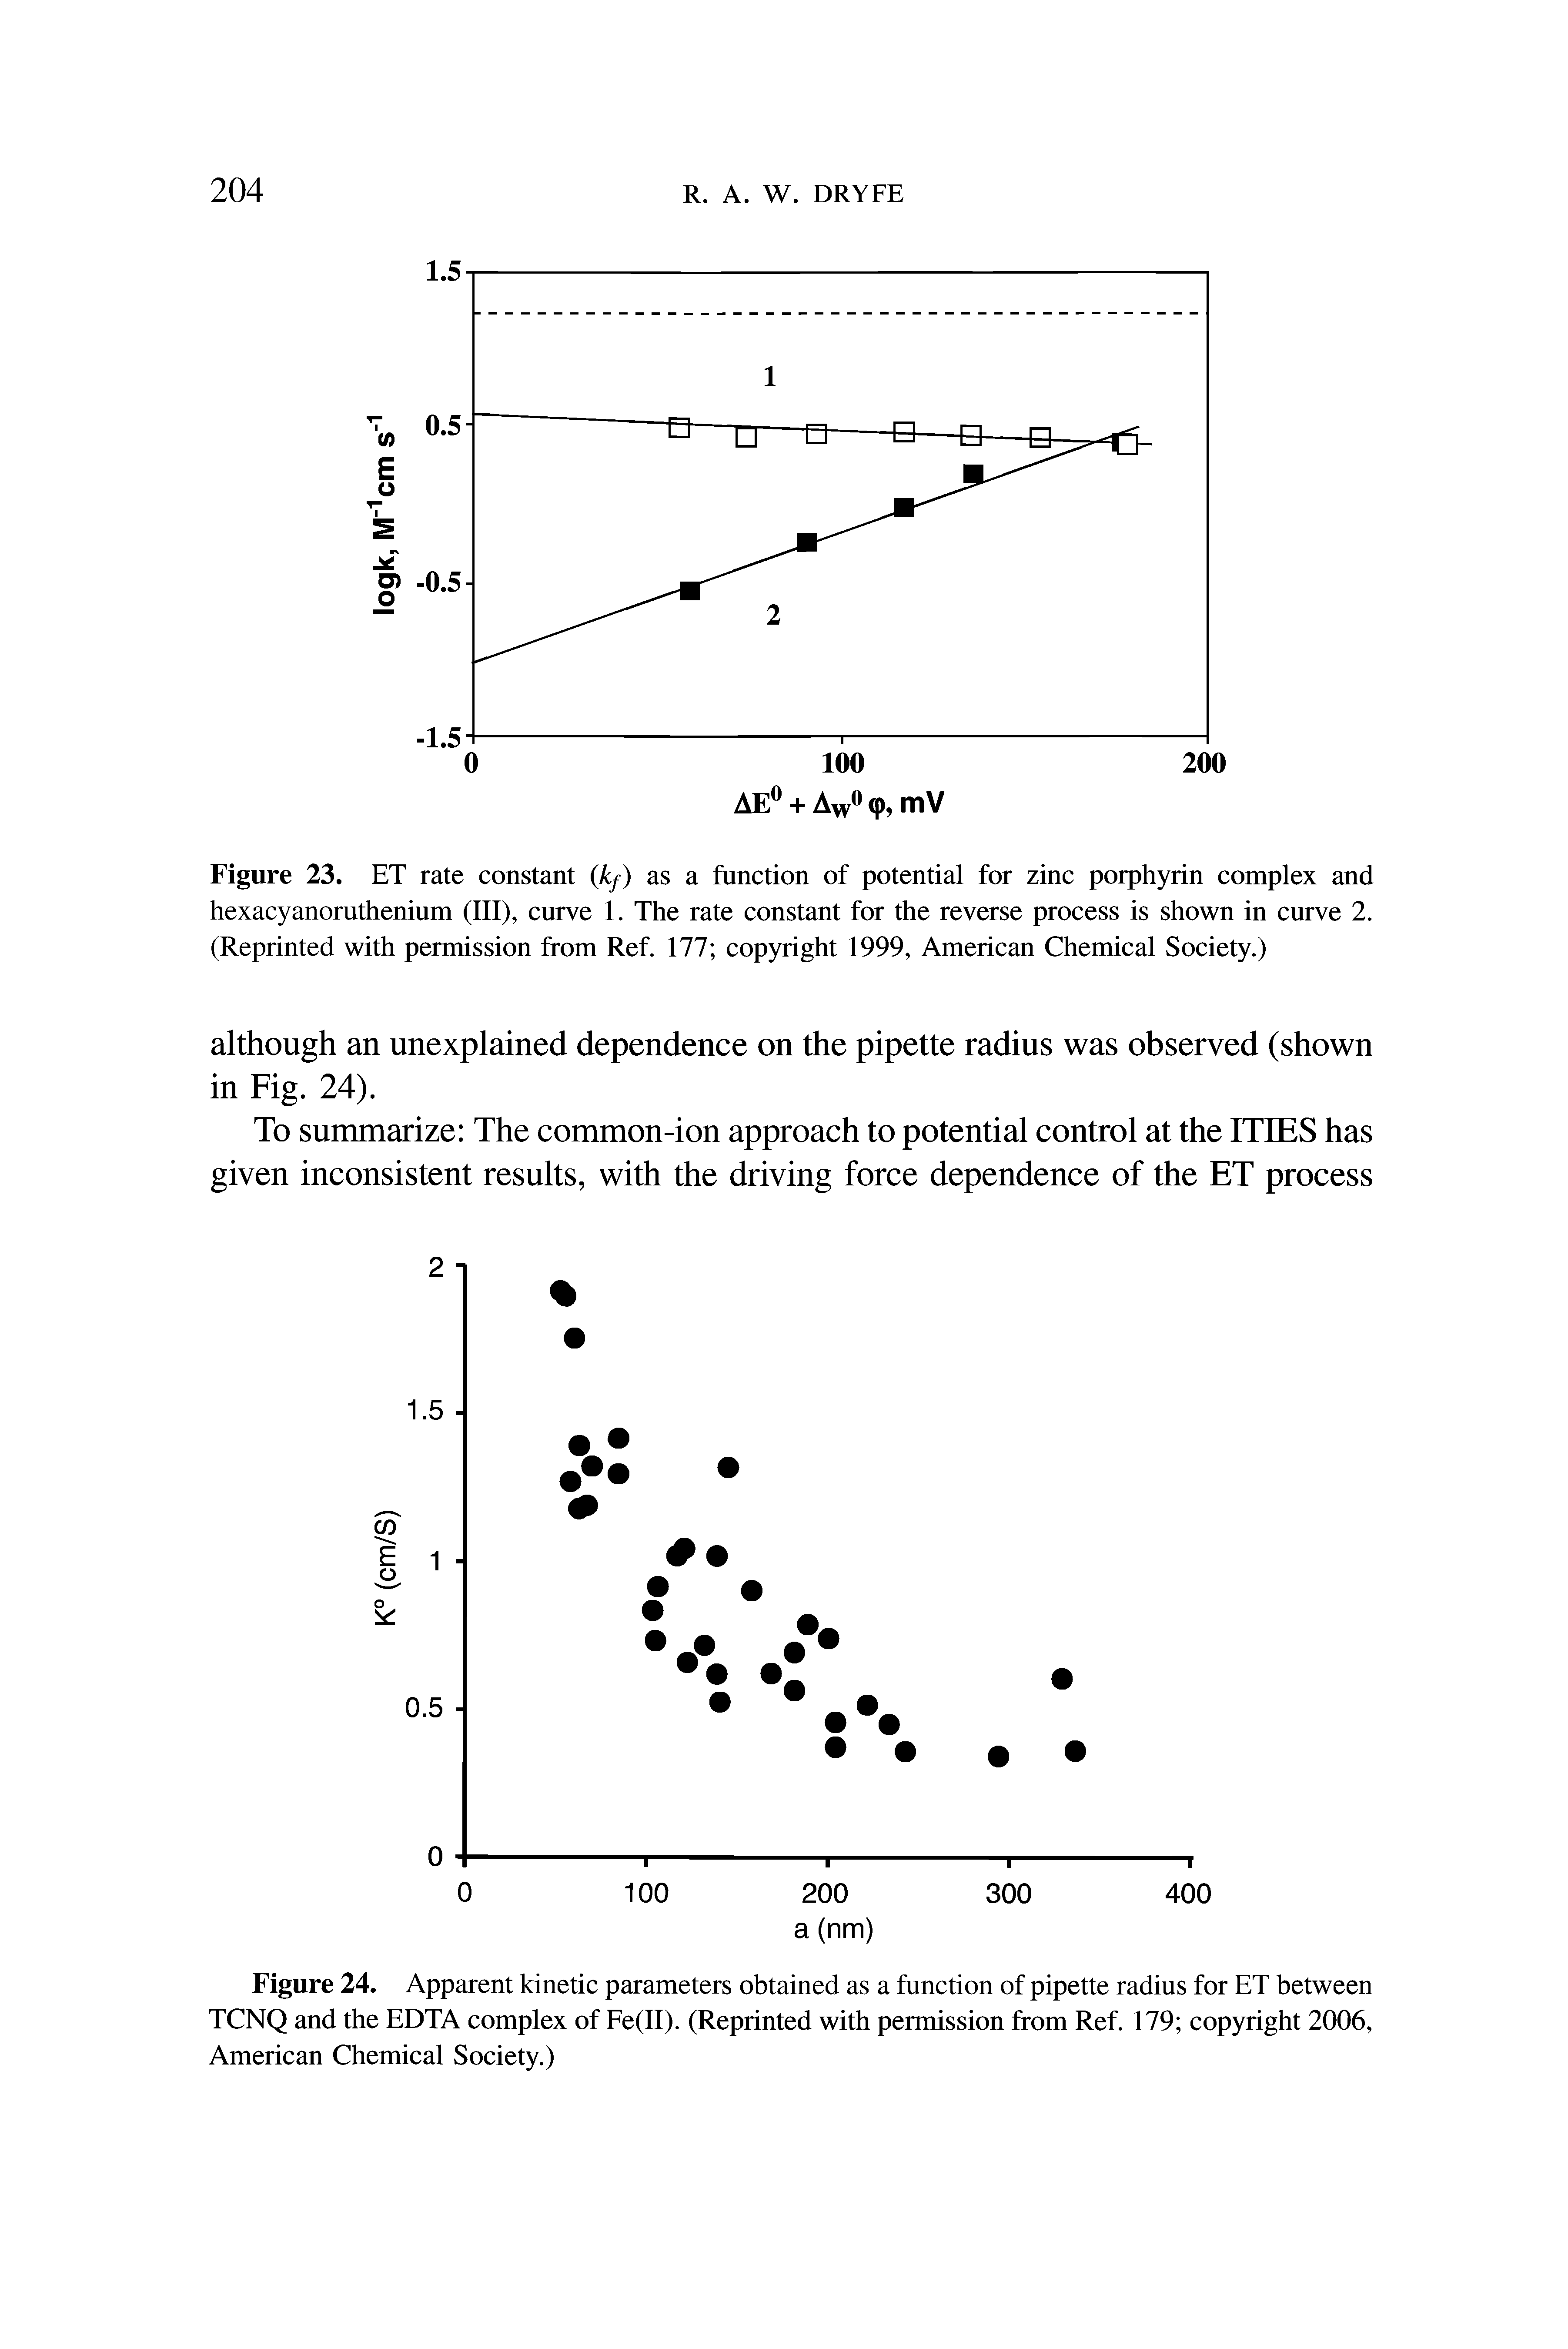 Figure 23. ET rate constant (kf) as a function of potential for zinc porphyrin complex and hexacyanoruthenium (III), curve 1. The rate constant for the reverse process is shown in curve 2. (Reprinted with permission from Ref. 177 copyright 1999, American Chemical Society.)...